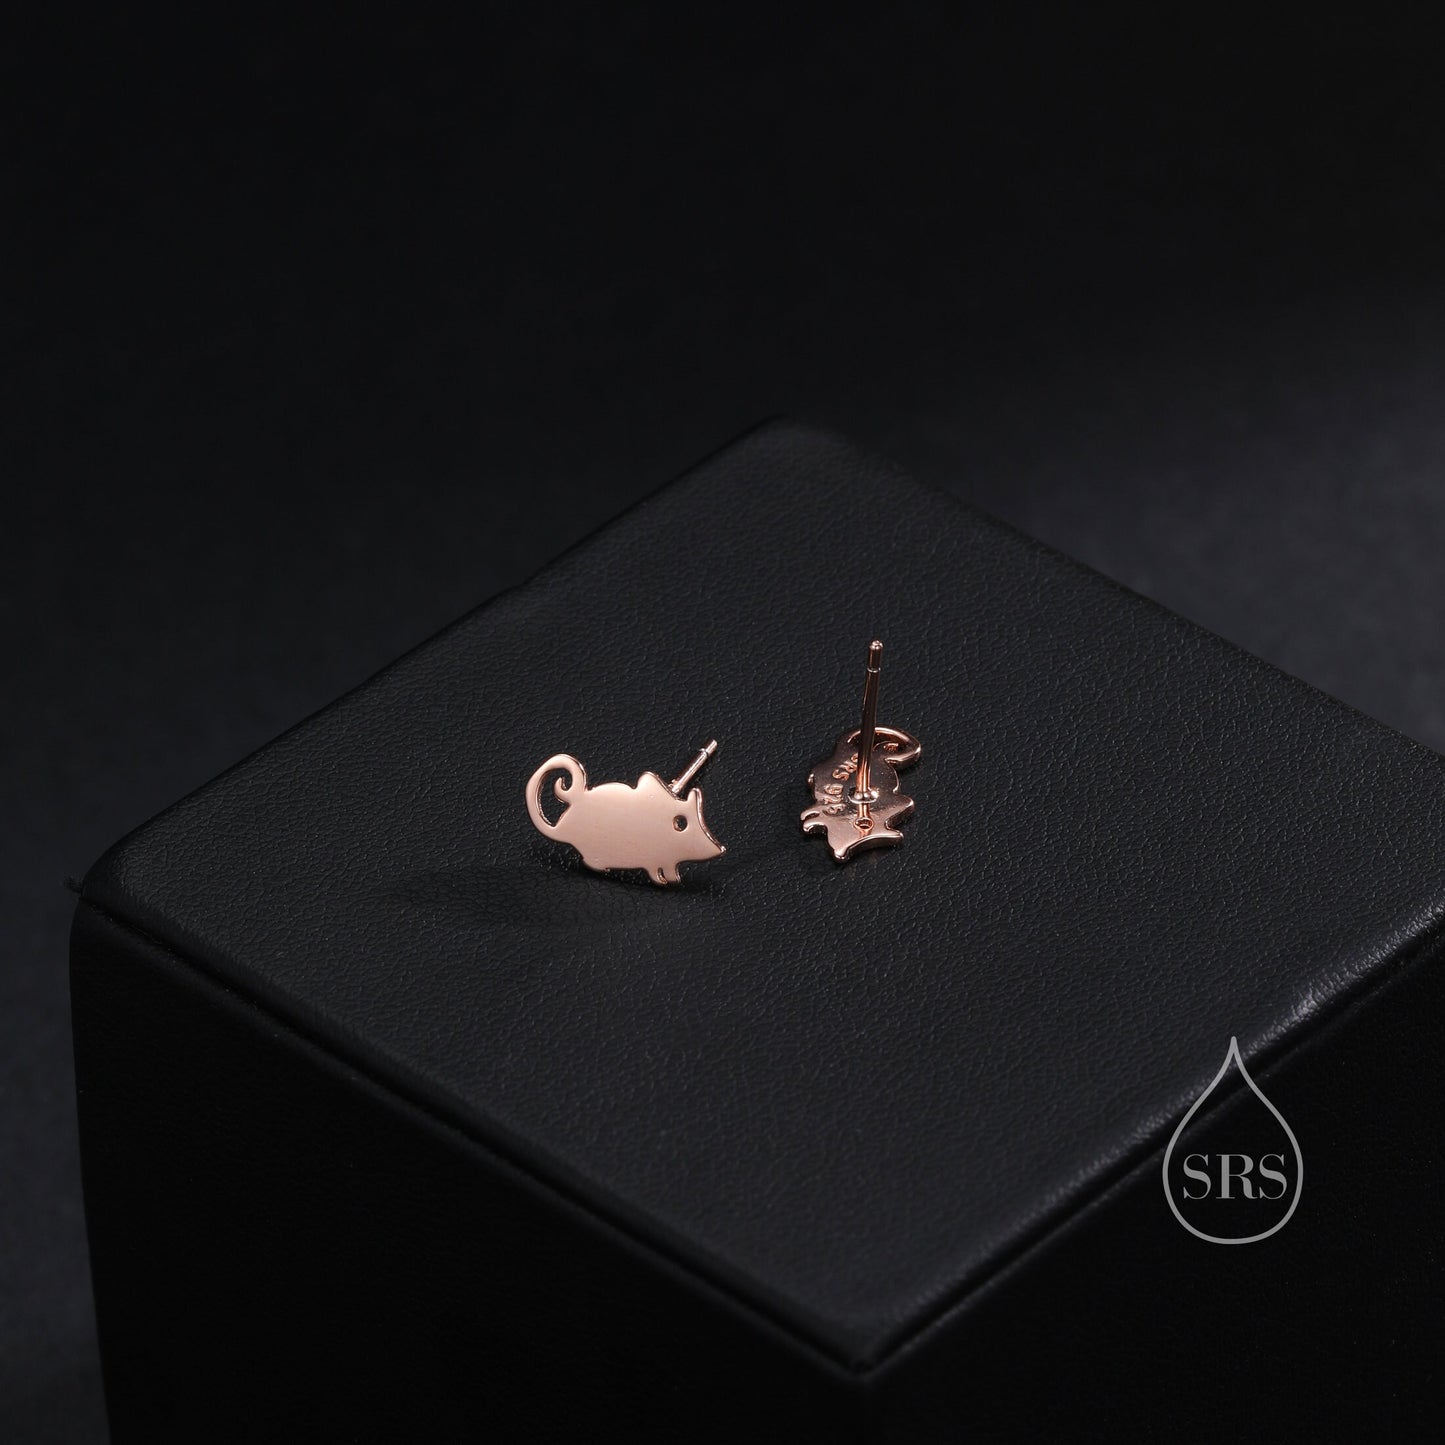 Cute Little Mouse Stud Earrings in Sterling Silver, Silver or Gold or Rose Gold, Cute Fun Quirky Animal Jewellery, Animal Lover Gift